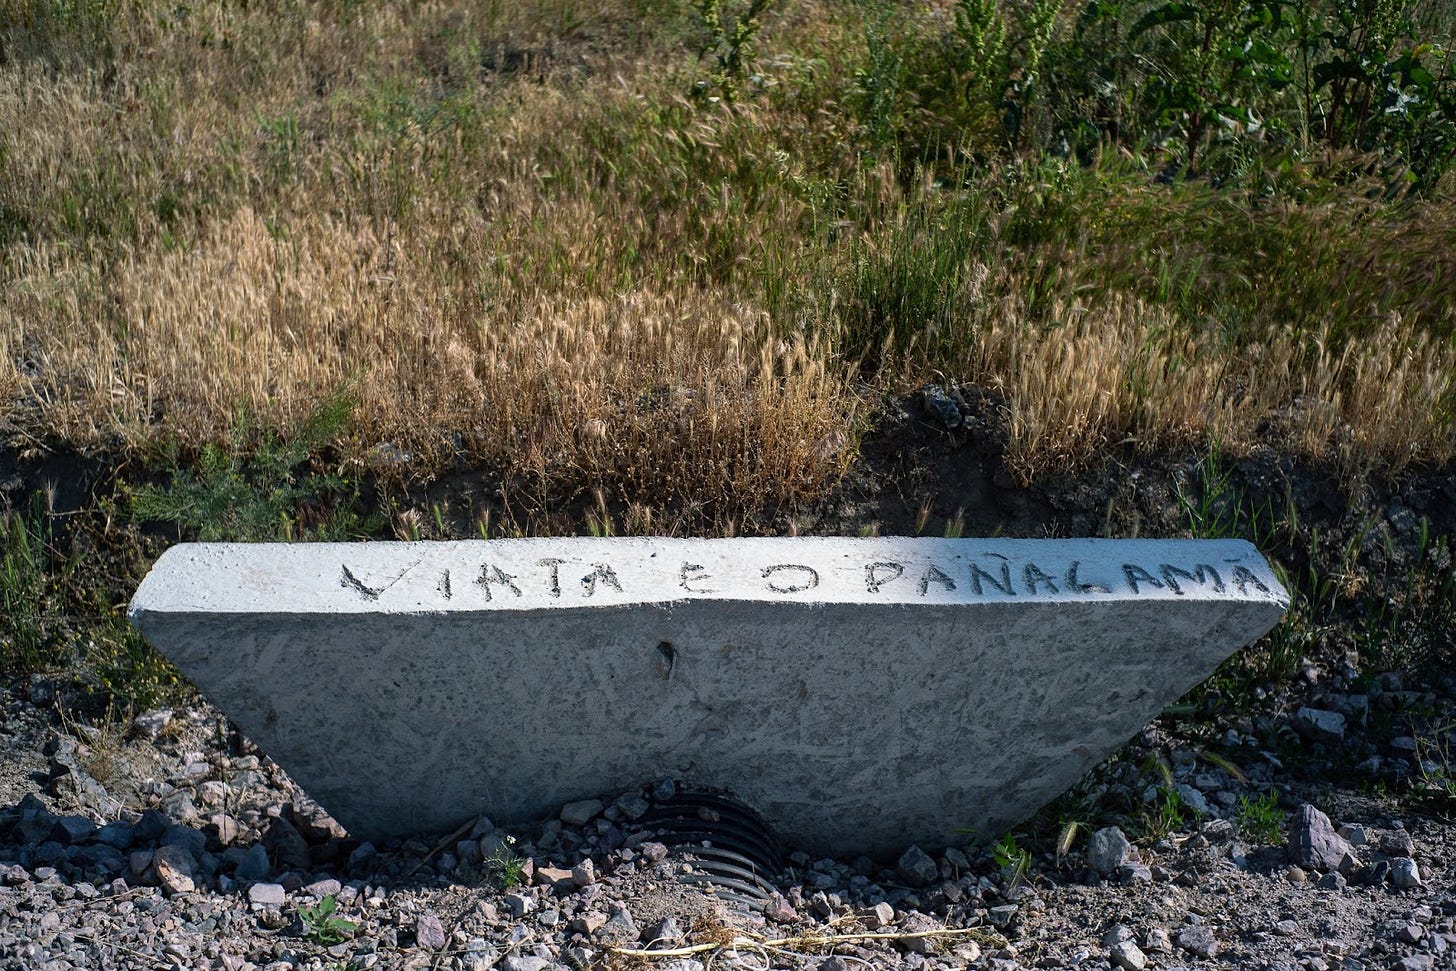 A concrete drain with writing on it

Description automatically generated